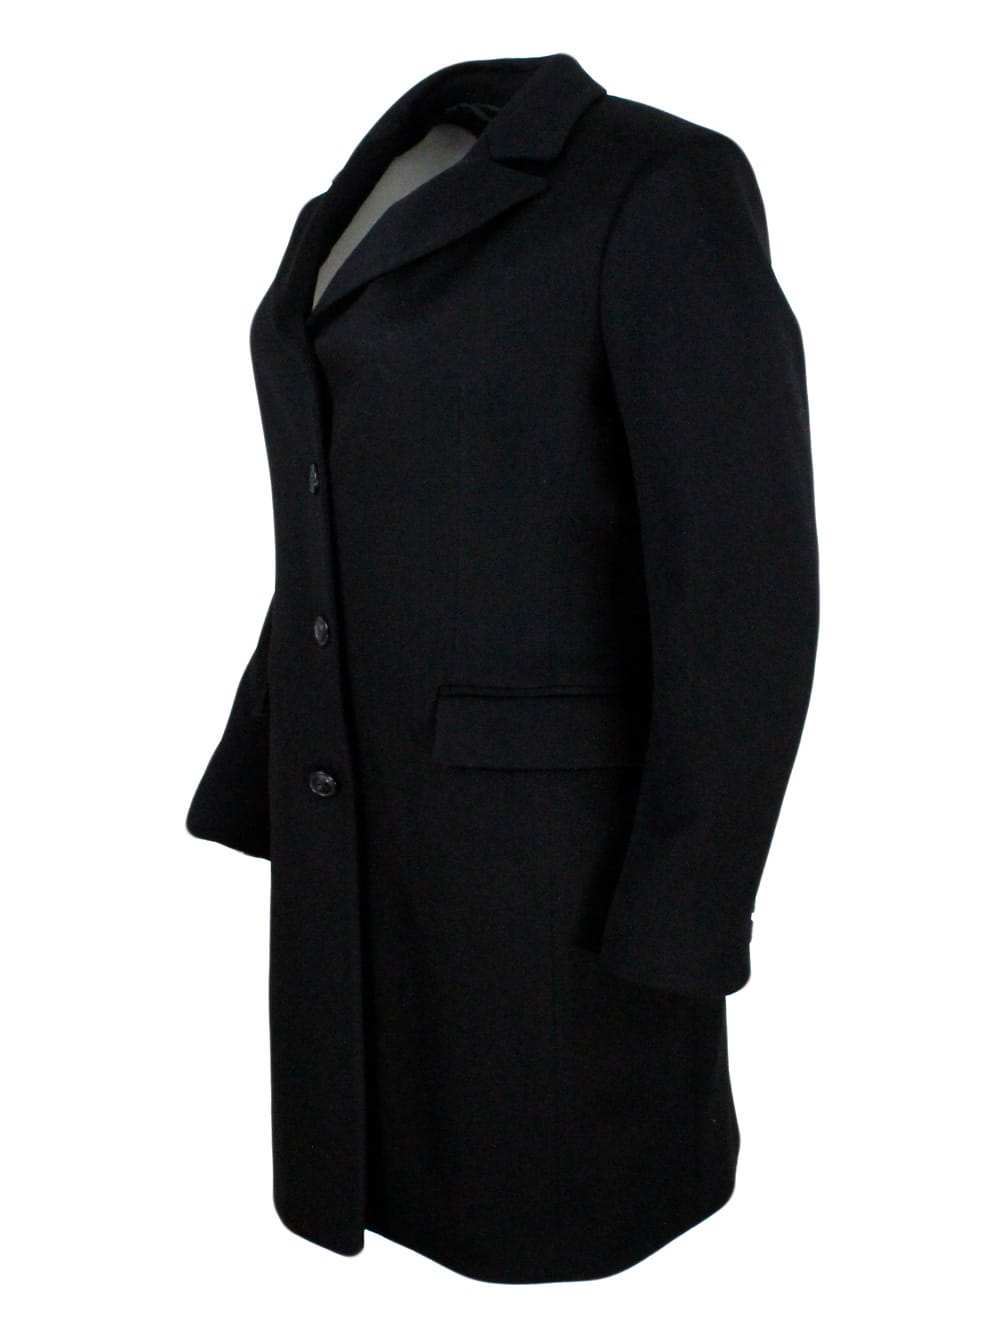 Shop Barba Napoli Single-breasted Coat Made Of Soft And Precious Cashmere With Flap Pockets And Button Closure. Matchi In Black